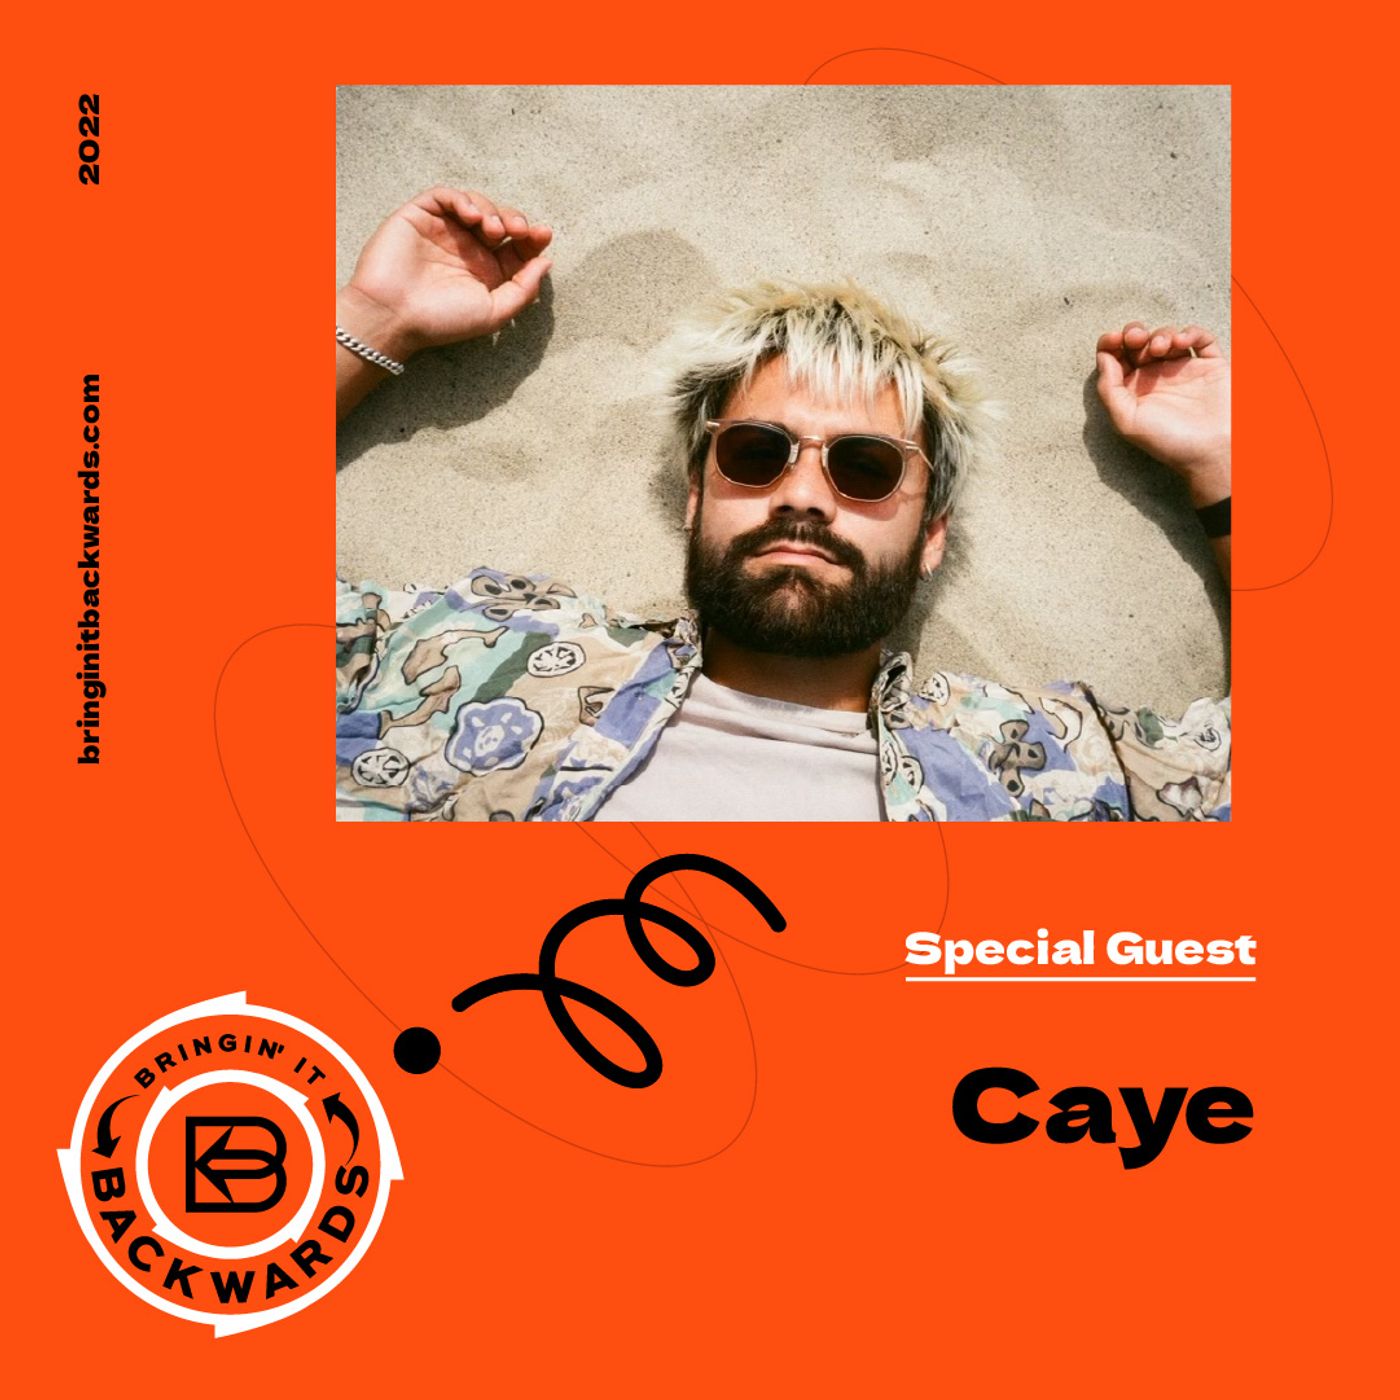 Interview with Caye Image